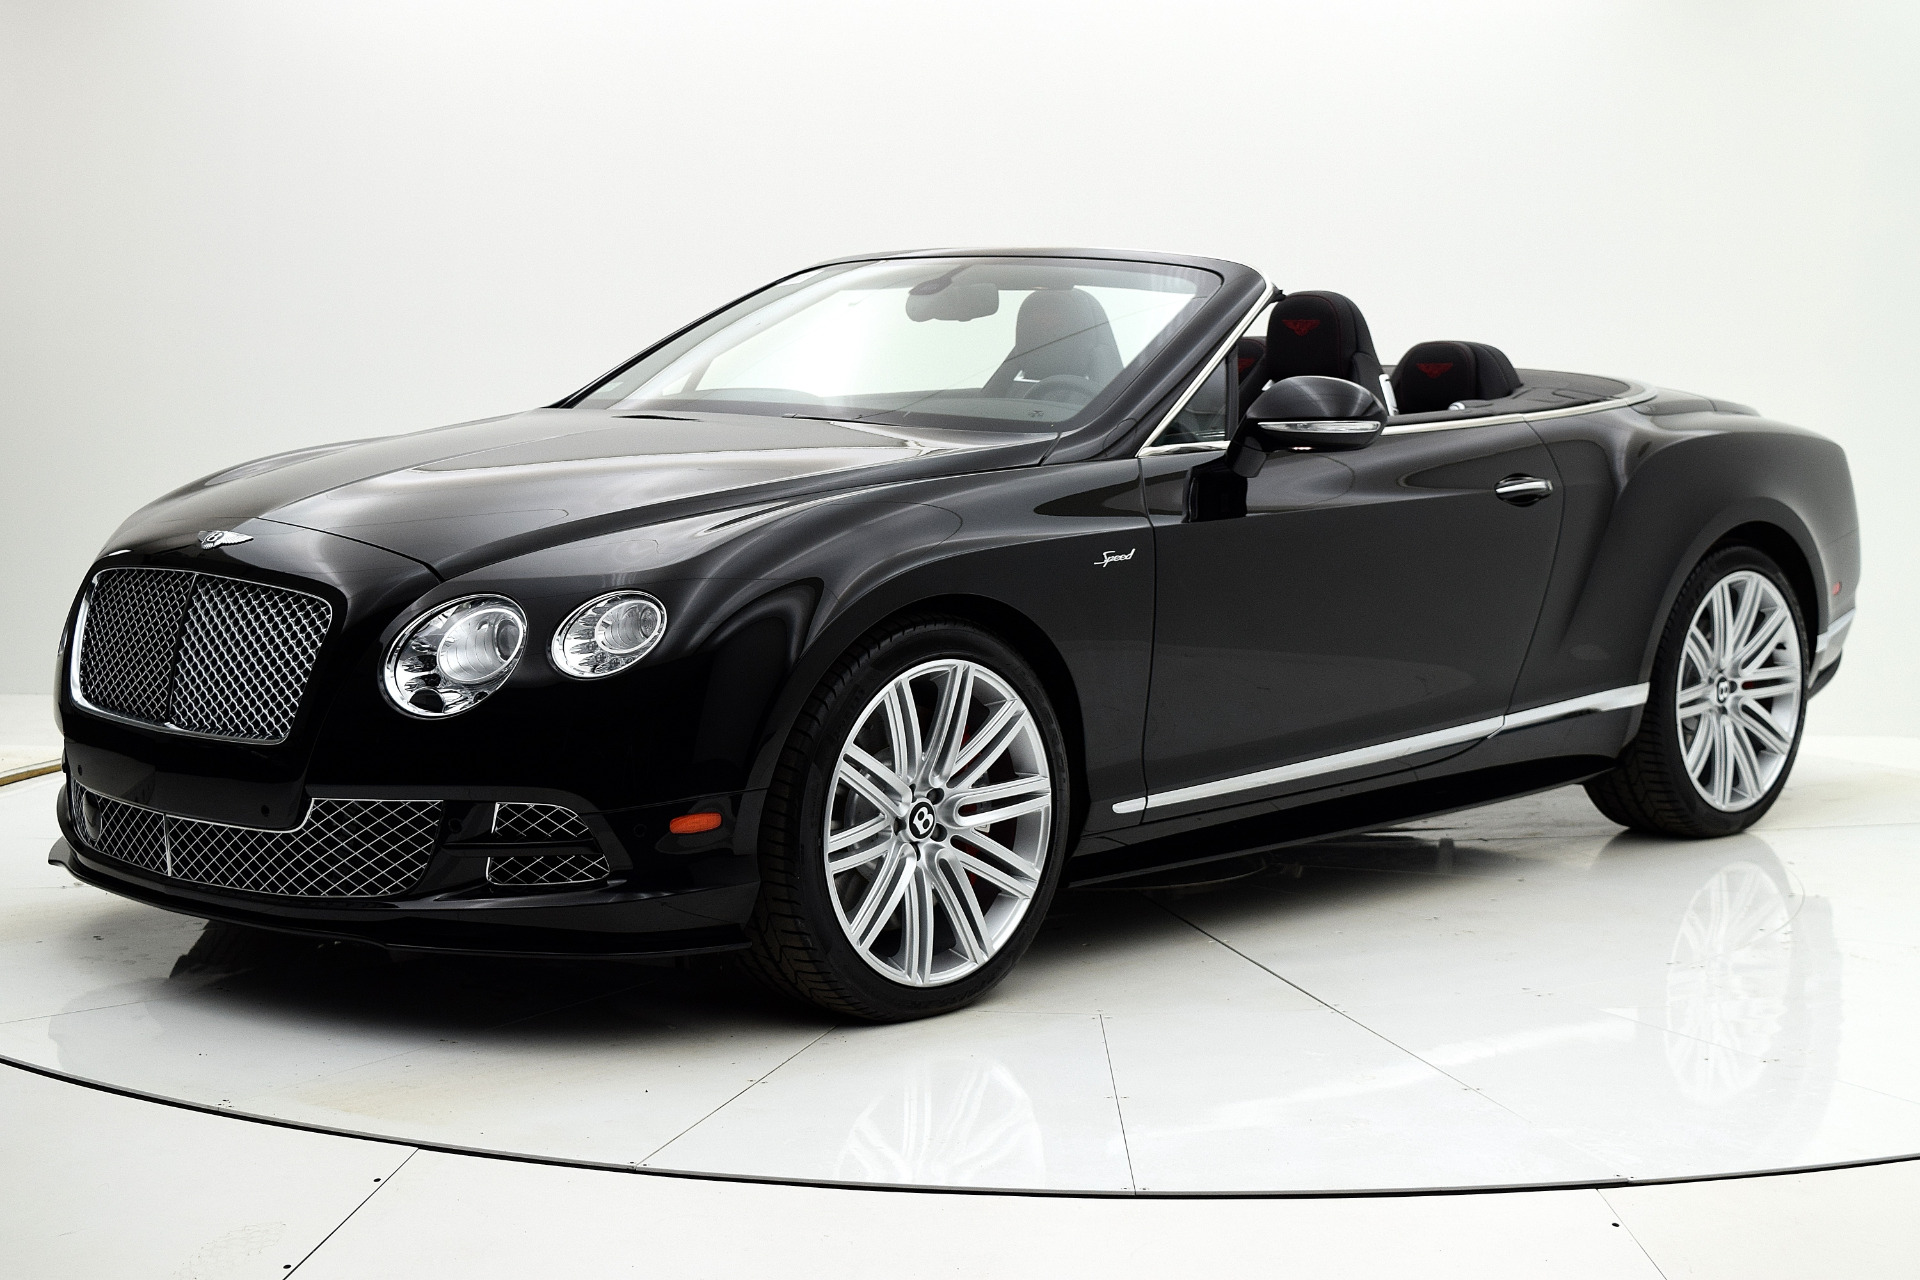 Used 2015 Bentley Continental GT Speed Convertible for sale Sold at Bentley Palmyra N.J. in Palmyra NJ 08065 2